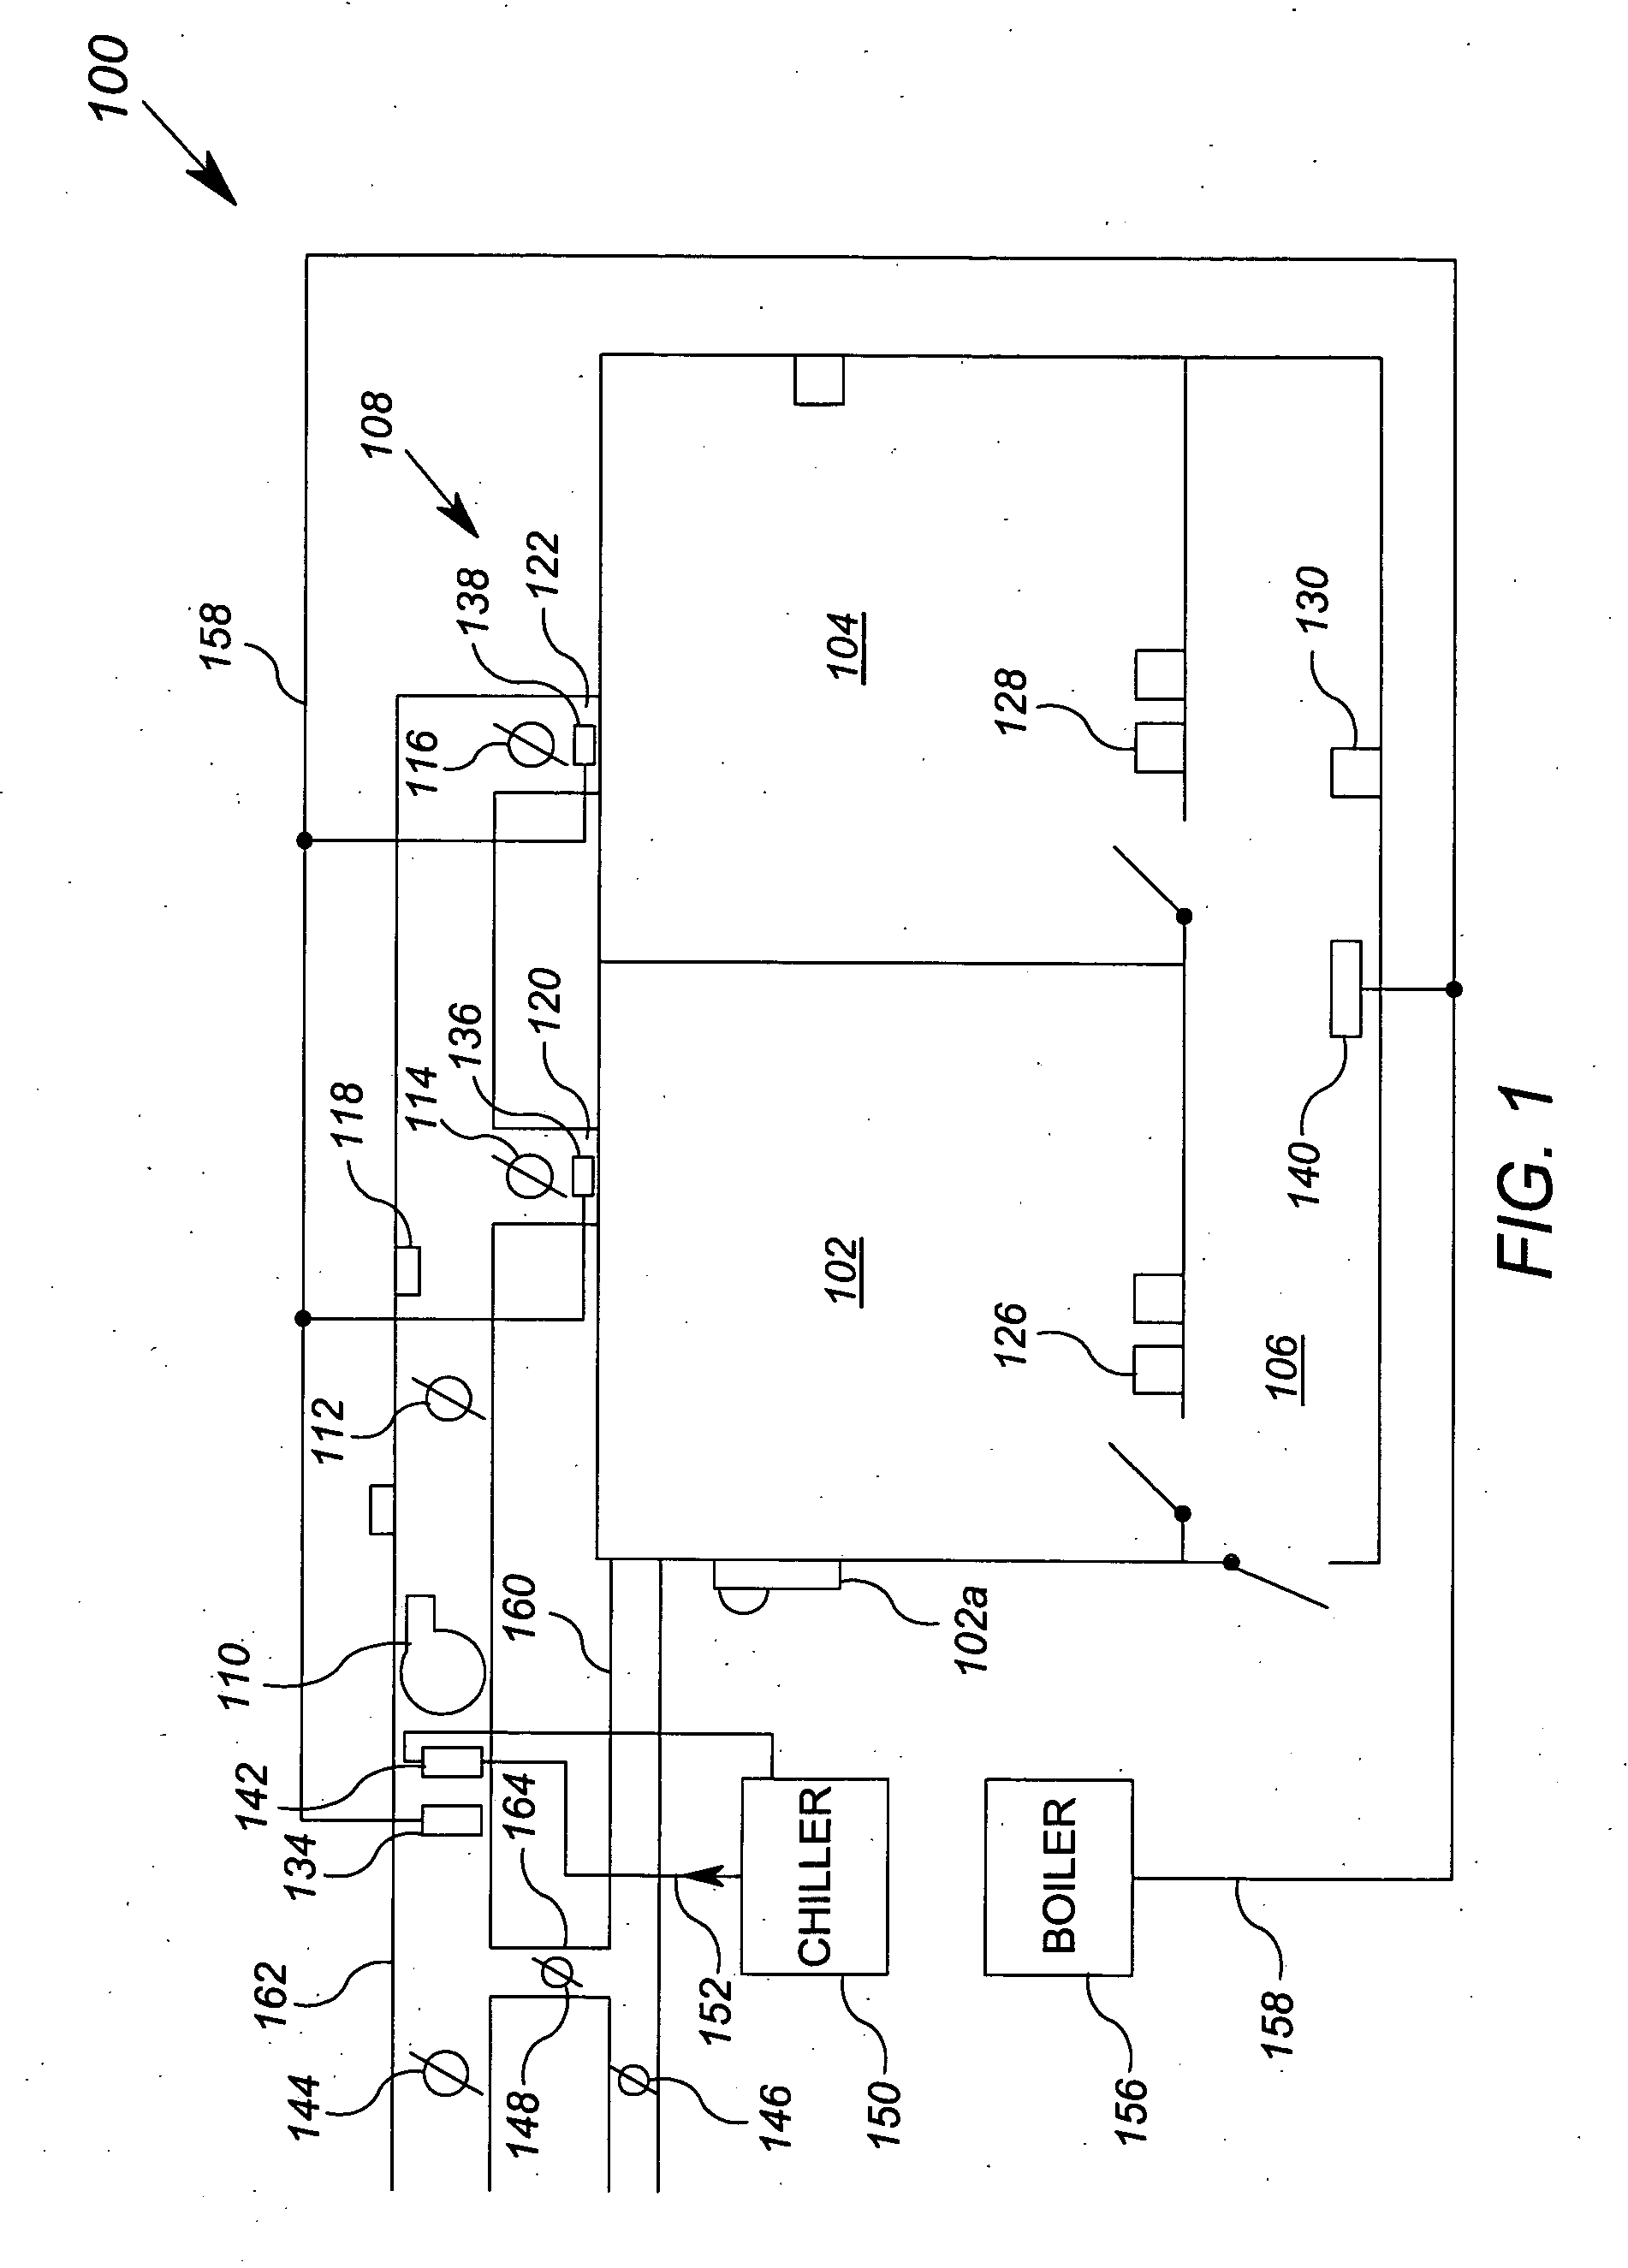 Method and apparatus for representing a building system enabling facility viewing for maintenance purposes